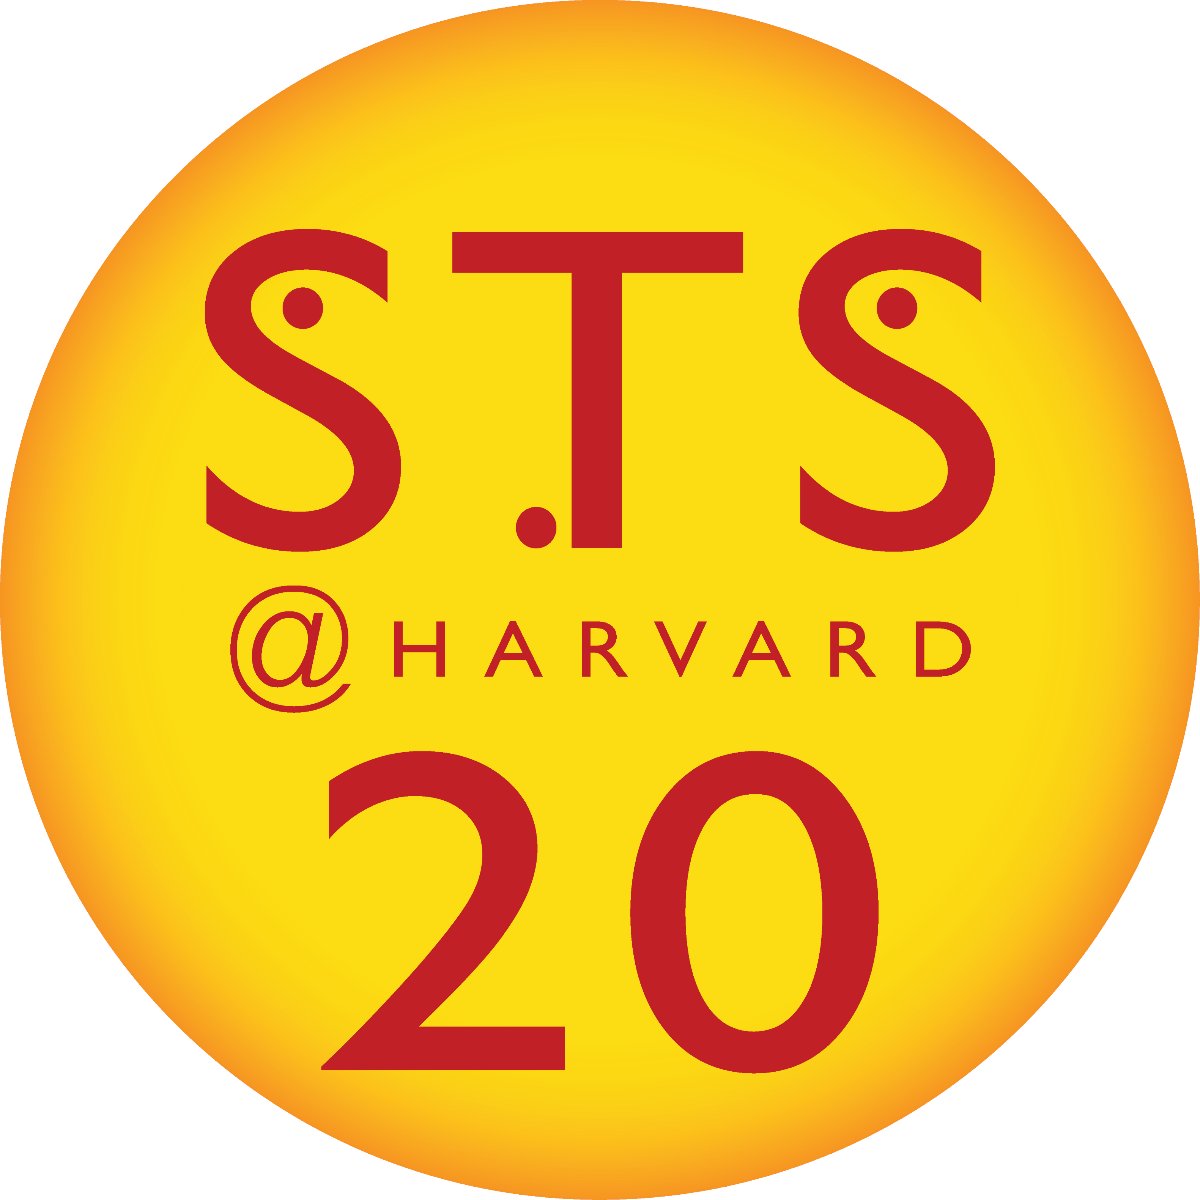 🍾 Announcing the Symposium on Science, Technology & the Human Future, 3 days of exploration on possible futures for knowledge, life, policy, cities, and STS. Nov 3-5, 2022 Harvard University Celebrating 20 years of the STS Program @Kennedy_School sts20th.org